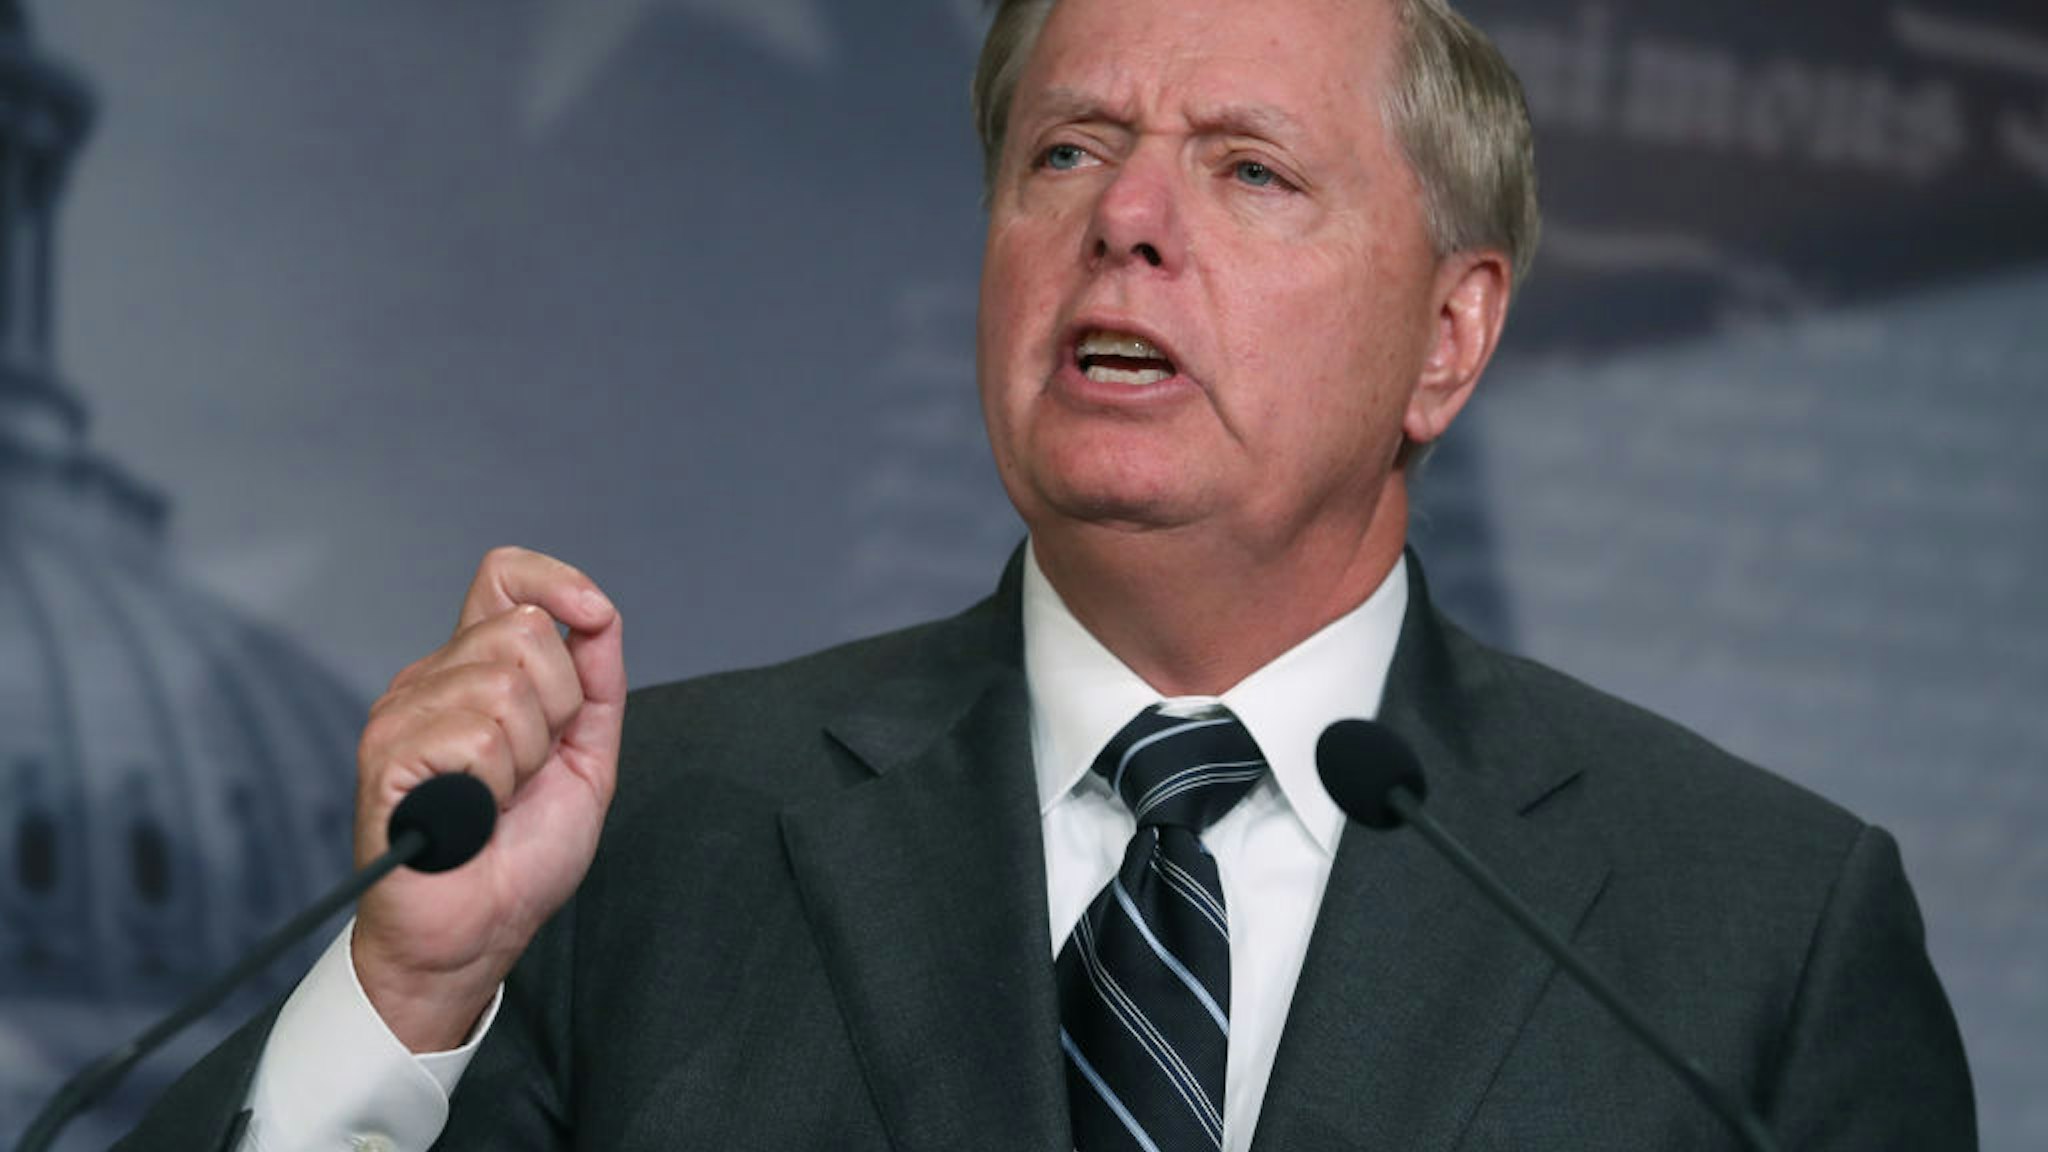 WASHINGTON, DC - OCTOBER 24: Senate Judiciary Committee Chairman Lindsey Graham (R-SC), speaks after introducing a resolution condemning House Impeachment inquiry against President Donald Trump, at the U.S. Capitol on October 24, 2019 in Washington, DC.